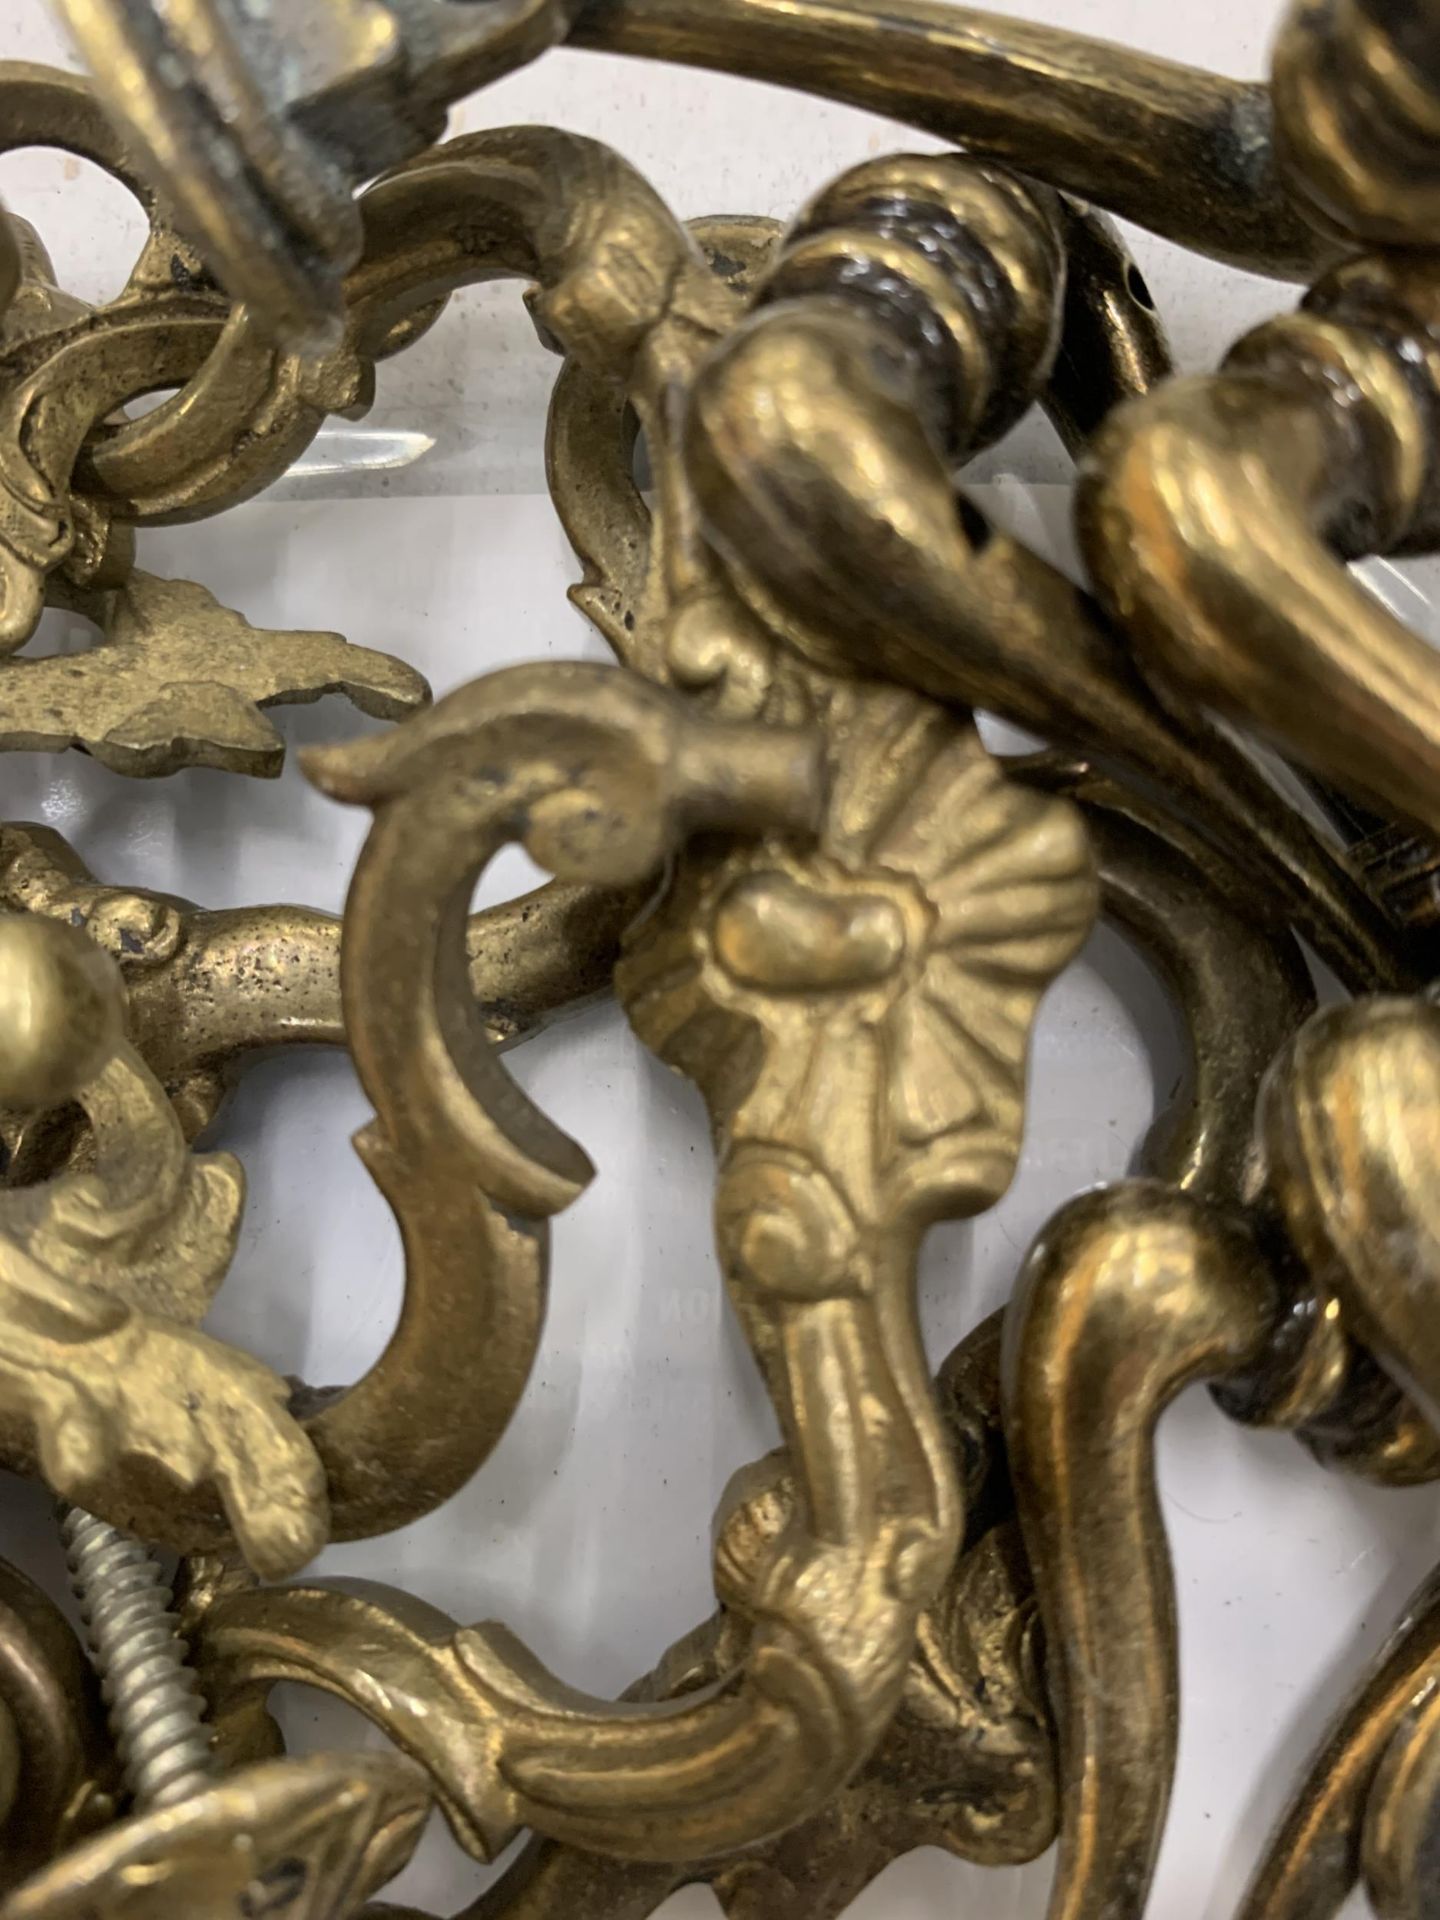 A QUANTITY OF VINTAGE STYLE BRASS HANDLES - Image 3 of 4